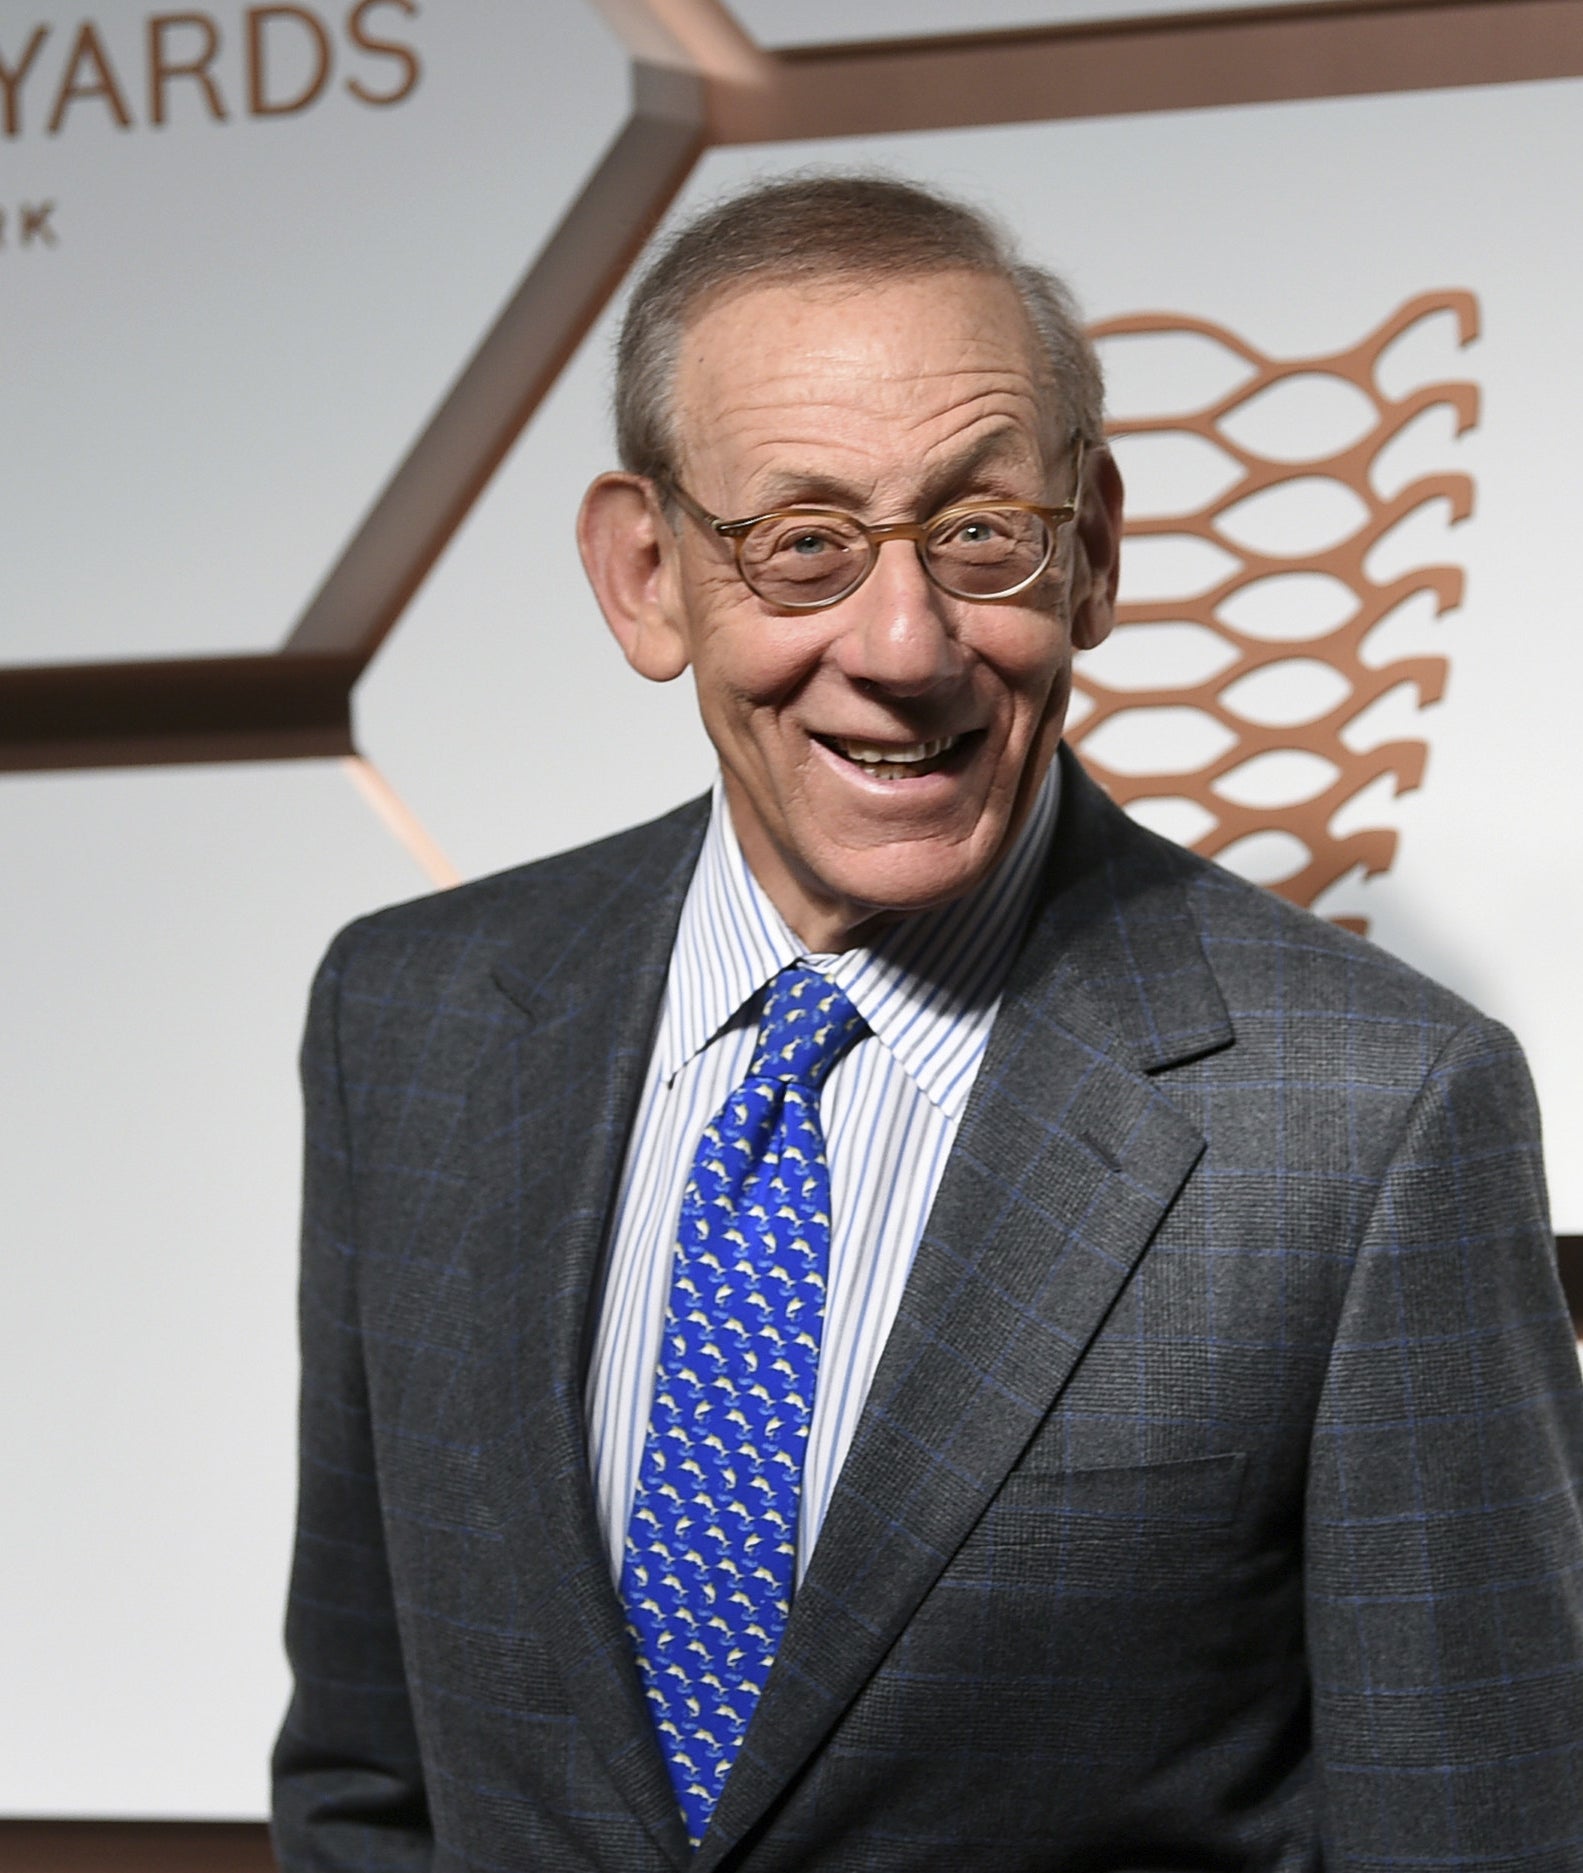 Miami Dolphins, SoulCycle, & Equinox billionaire Stephen M. Ross hosts  Trump fundraiser. People are angry and surprised.